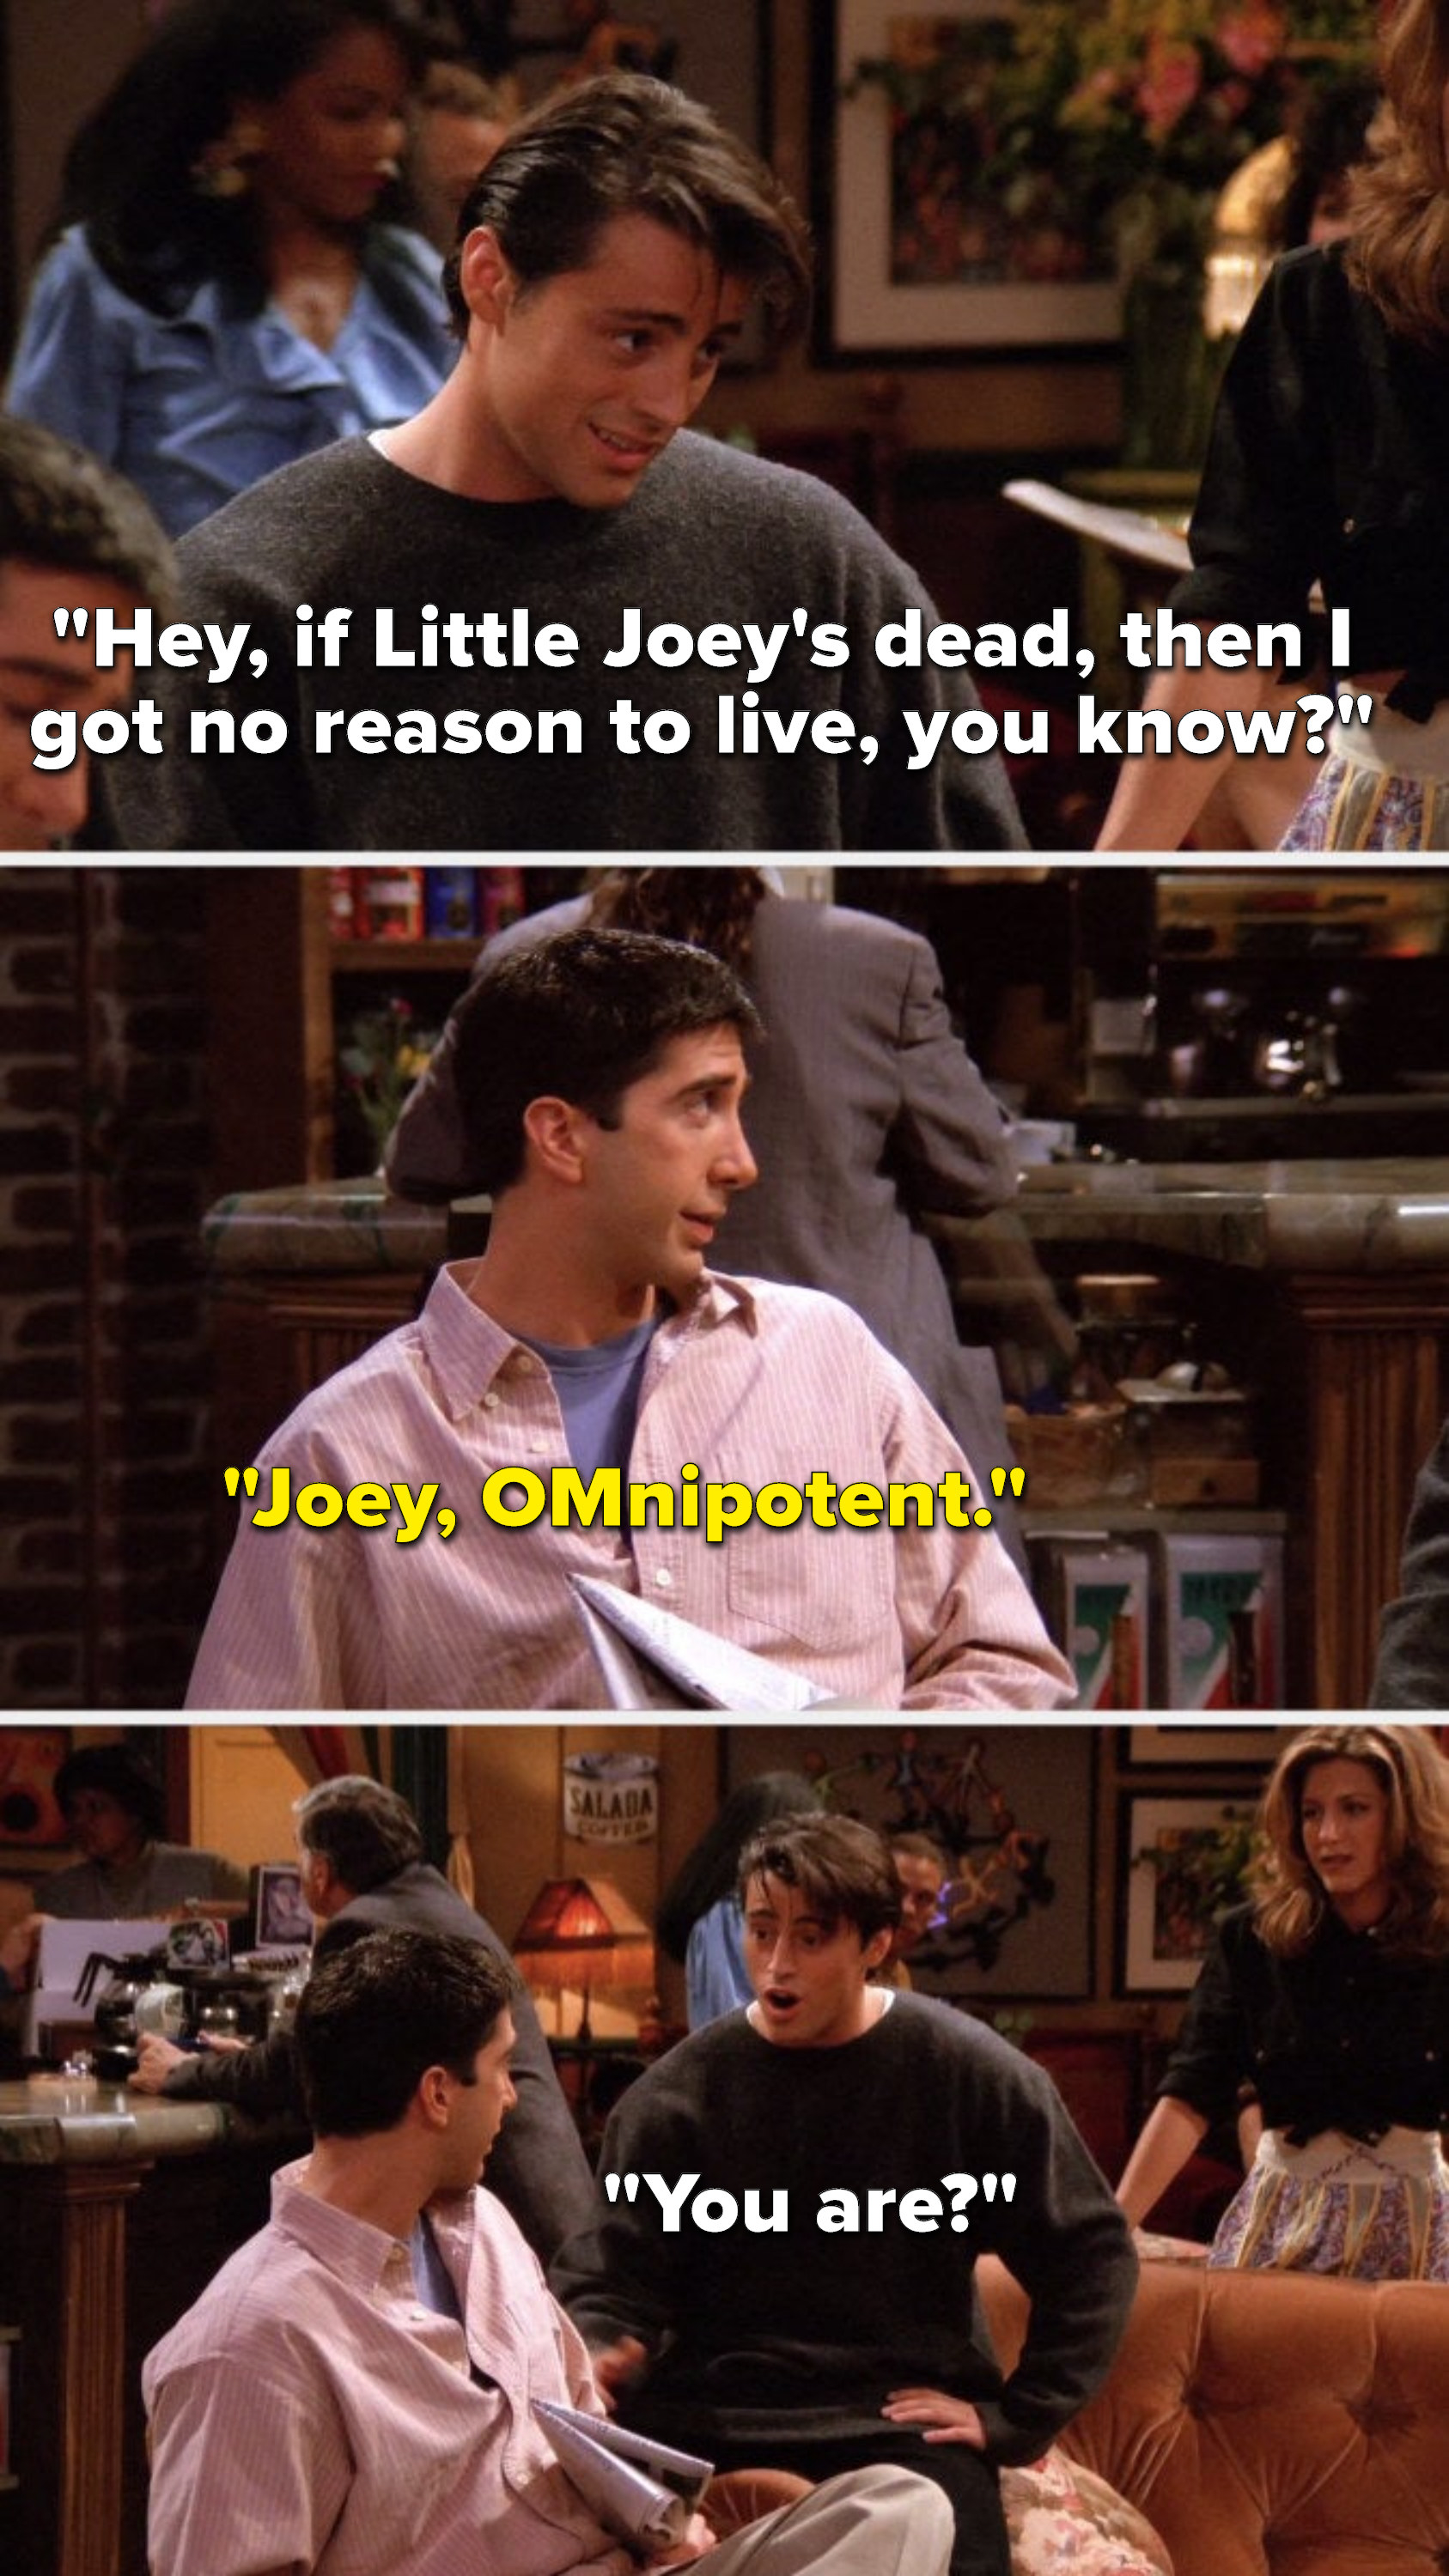 Joey says, &quot;Hey, if Little Joey&#x27;s dead, then I got no reason to live, you know,&quot; Ross says, &quot;Joey, OMnipotent,&quot; and Joey asks, &quot;You are&quot;